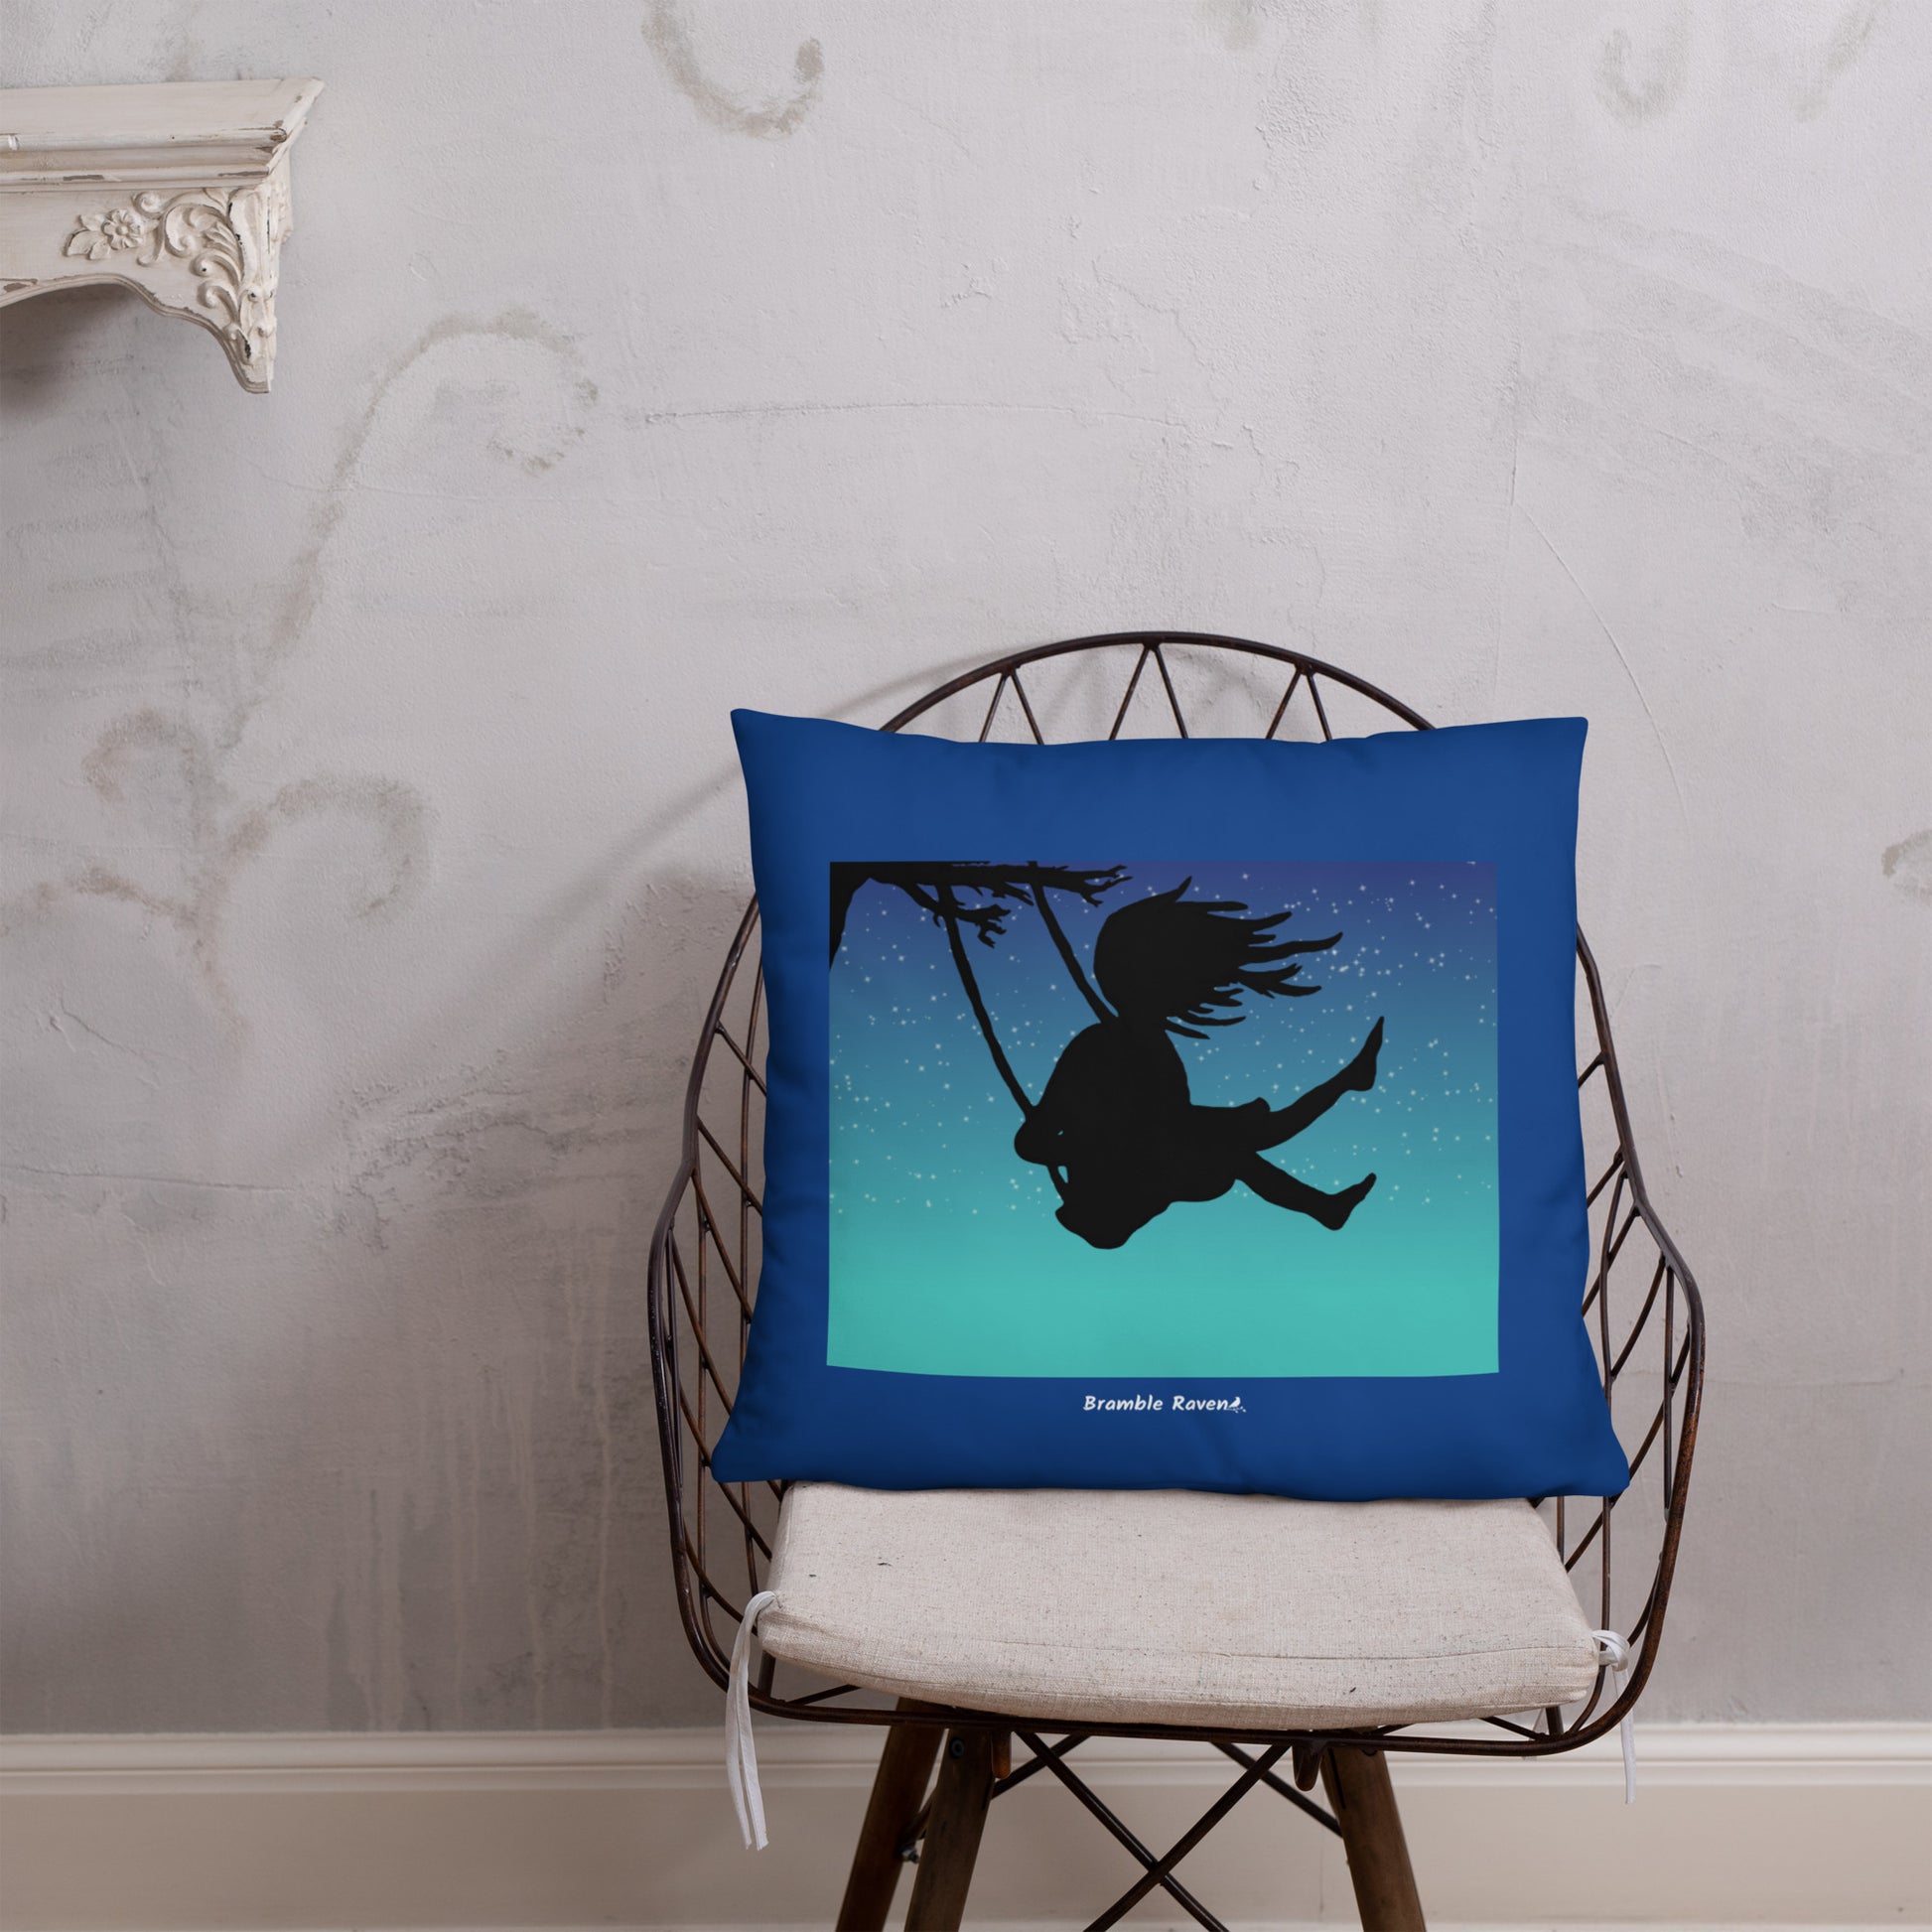 Original Swing Free design of a girl's silhouette in a tree swing against the backdrop of a blue starry sky. Rectangular image on front of pillow with blue background fabric. Pillow has design on both sides. 22 by 22 inch accent pillow. Shown on wicker chair.